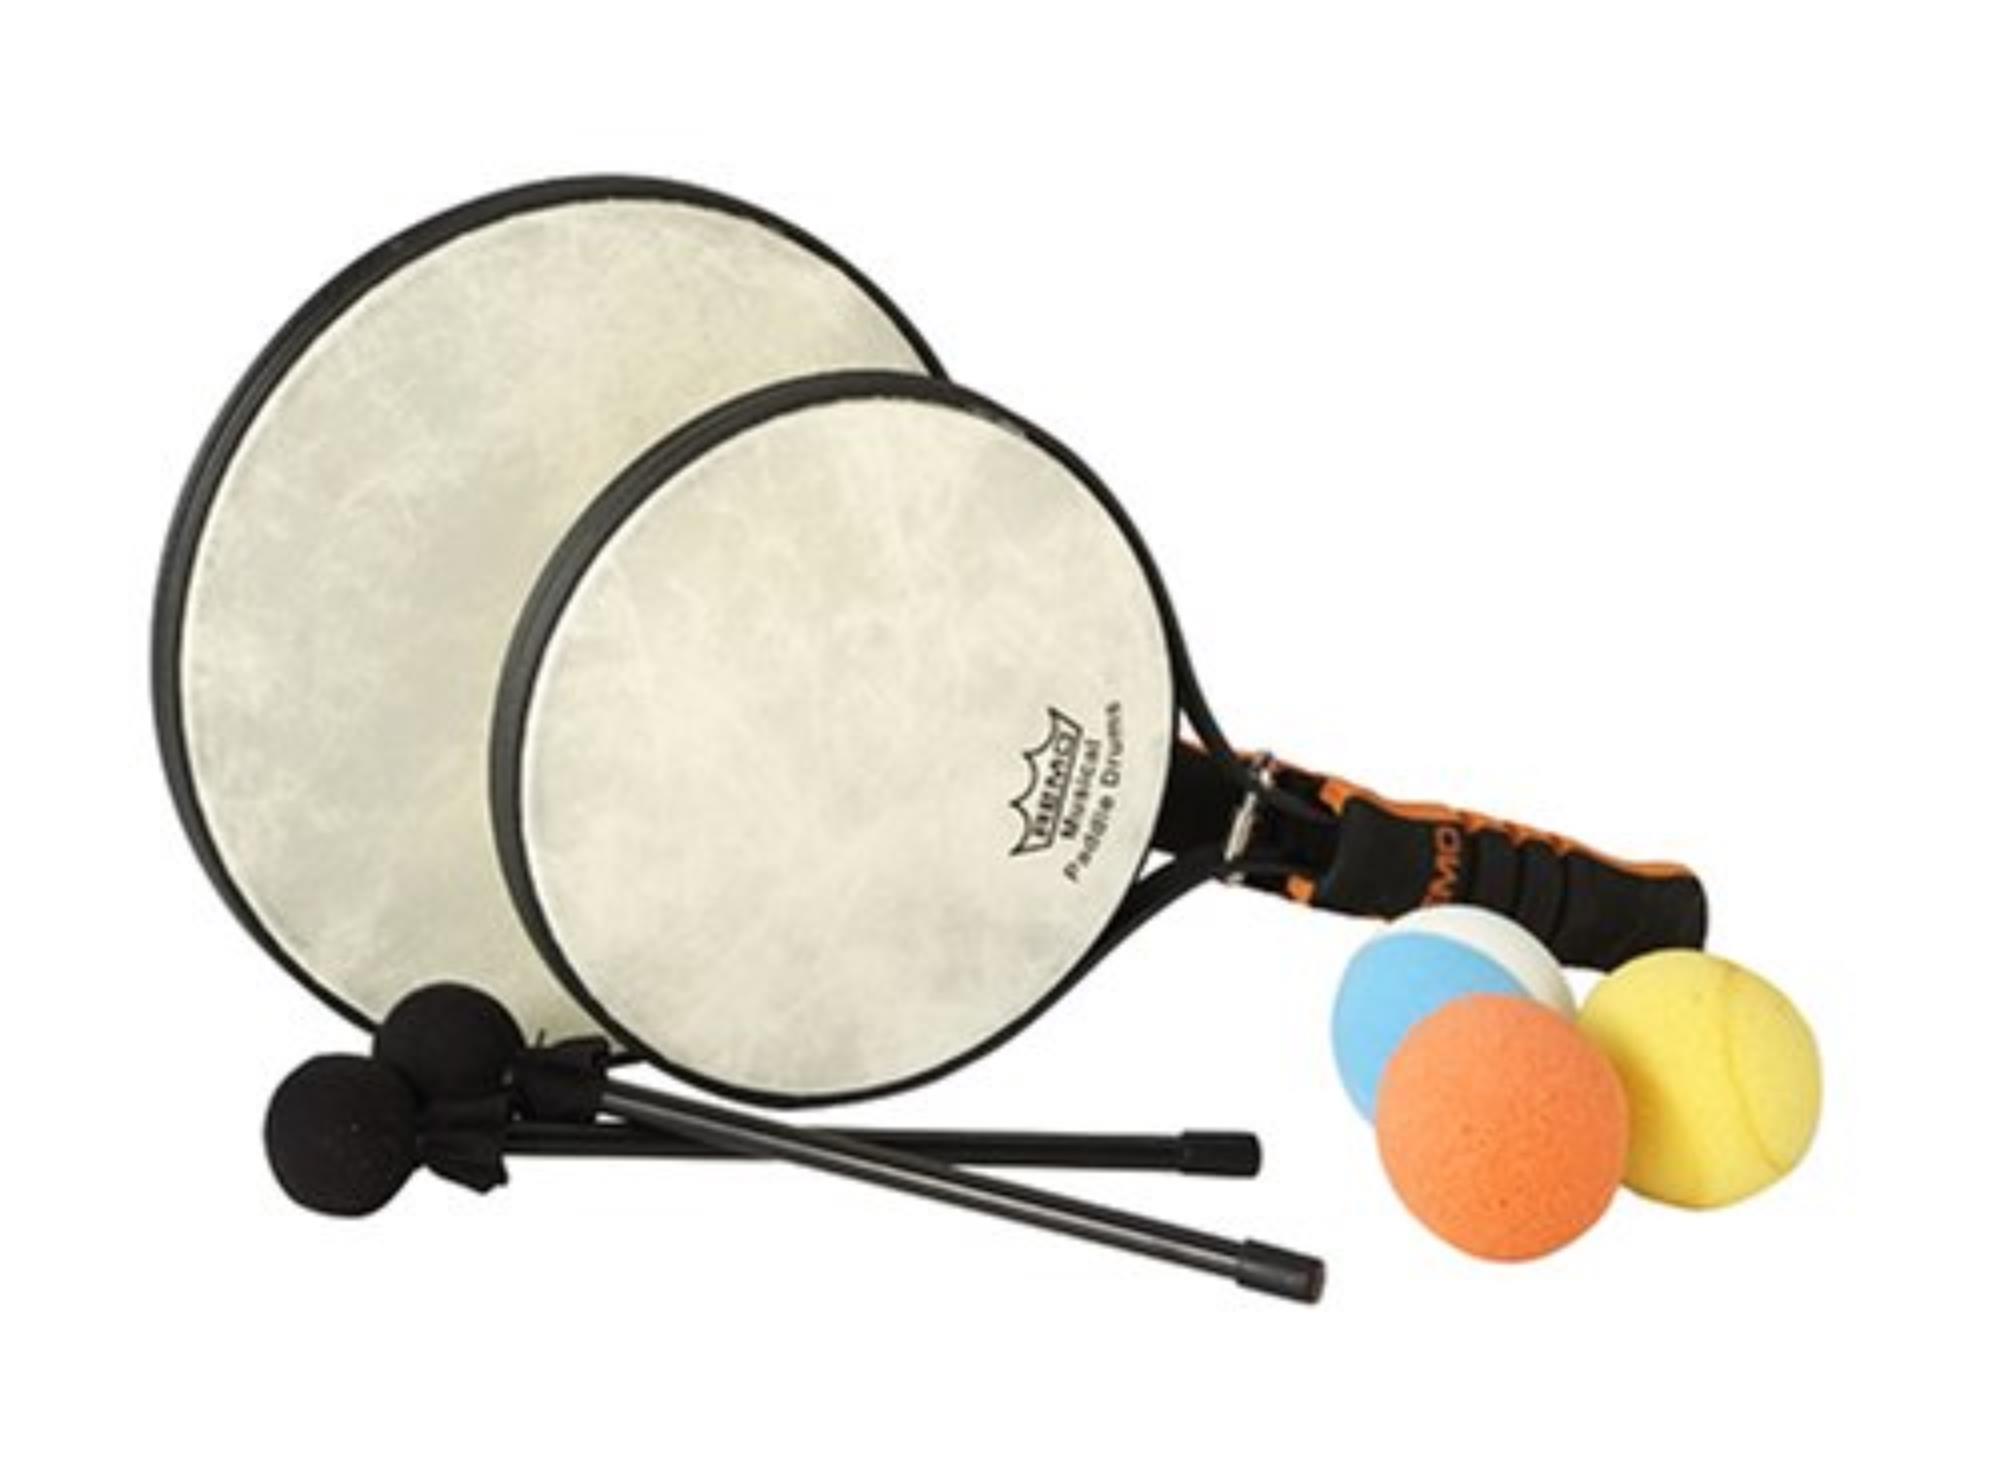 Remo Pd-2810-00 - Puddle Drum Set 8-10 - Remo - Drums- Percussions